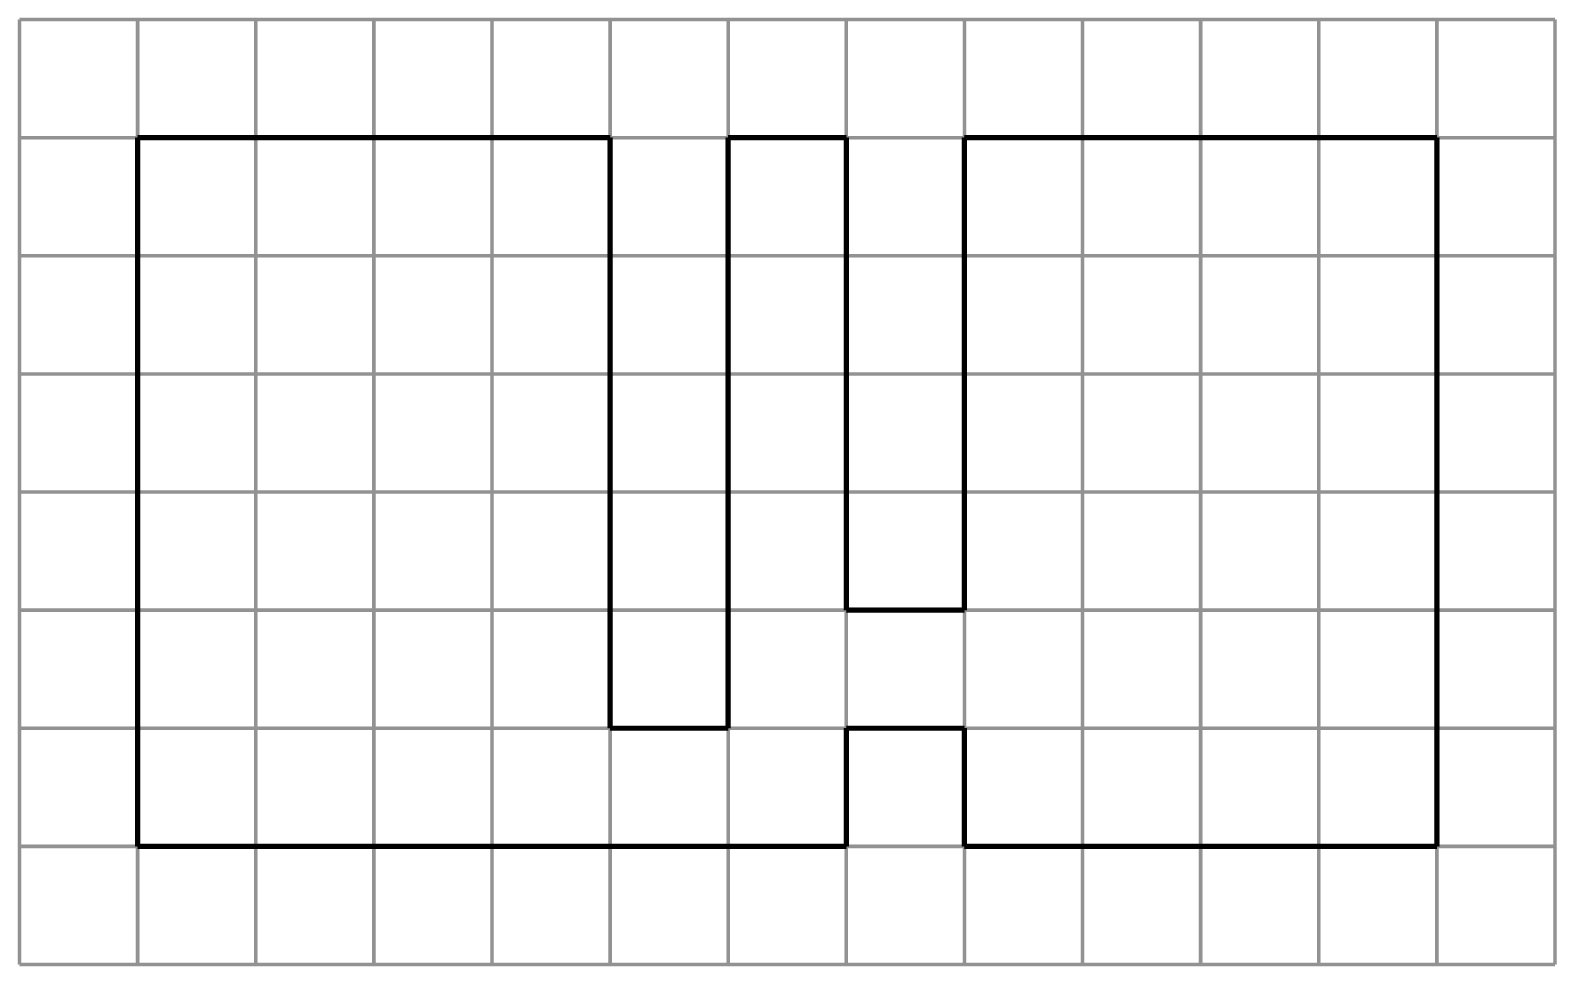 A rectangular grid shows bolded gridlines denoting the same map as the image above